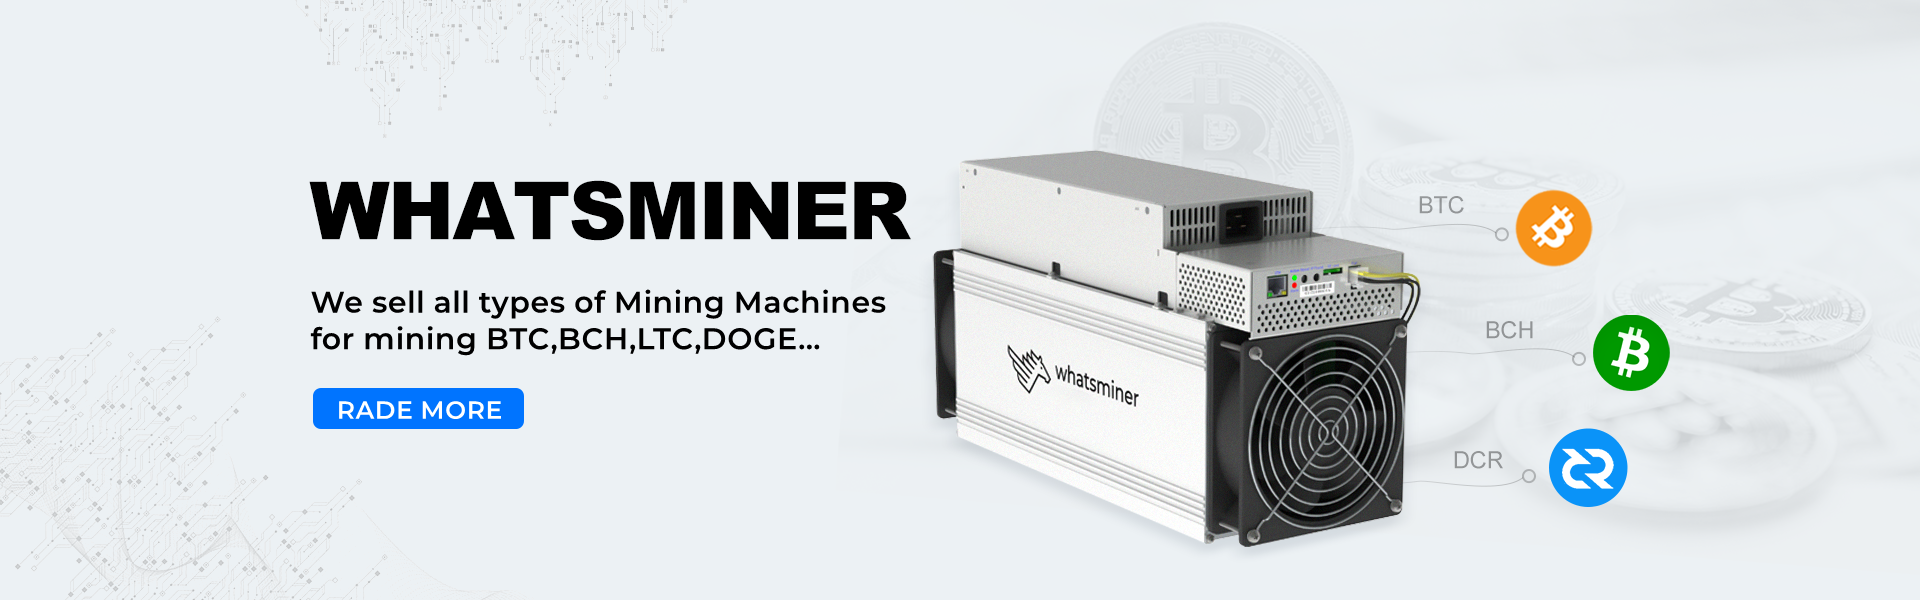 PC airson WHATSMINER_副本